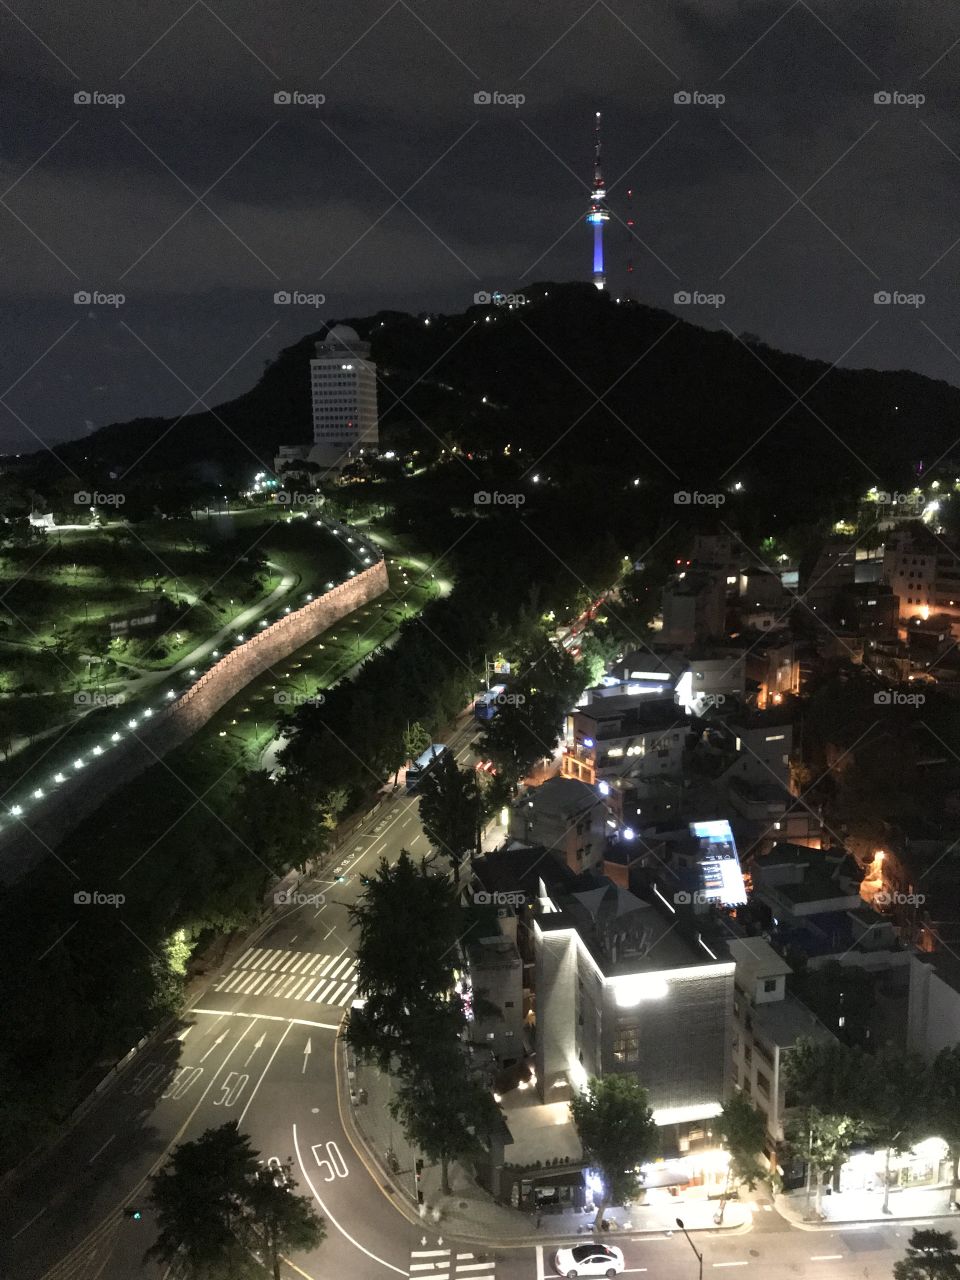 A night snap of Seoul in an August summer evening, with the TV tower lit up in the distance 